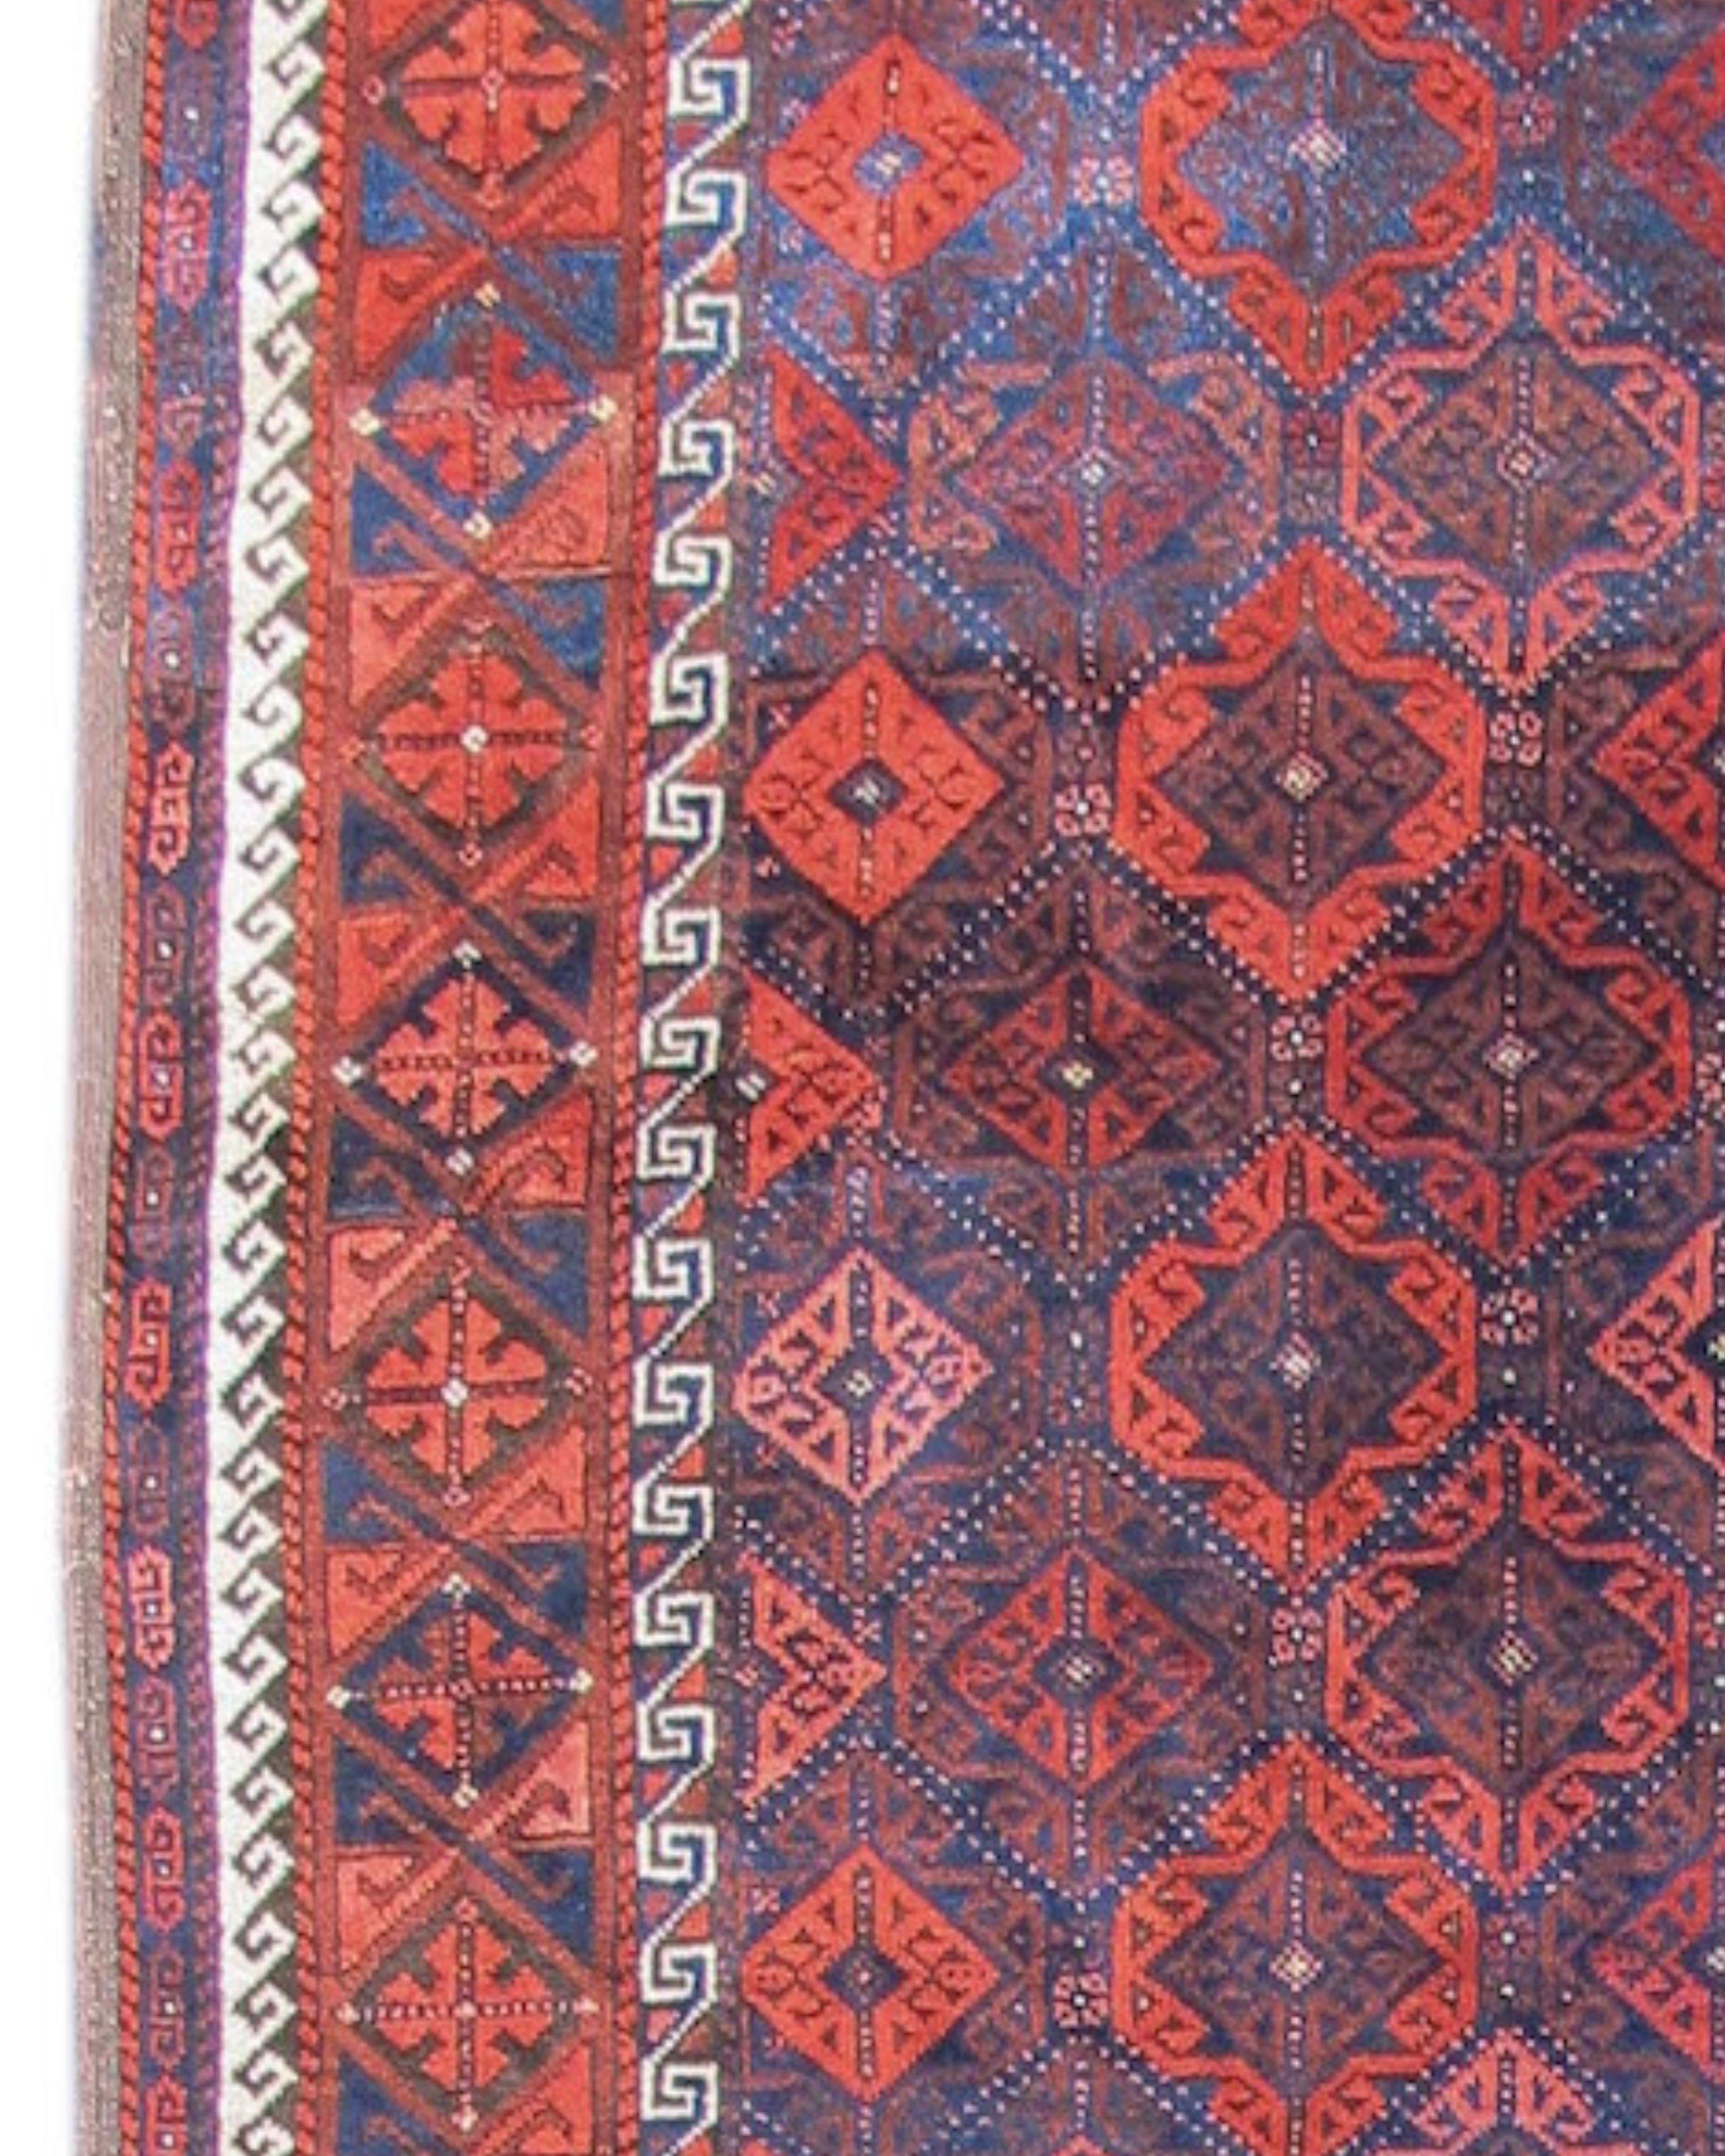 Antique Persian Baluch Runner Rug, Late 19th Century

This majestic Baluch rug was woven in the north east Persian province of Khorosan. With its fiery tone on tone reds and modulated polychromatic blues, it most likely hails from the Torbat region,